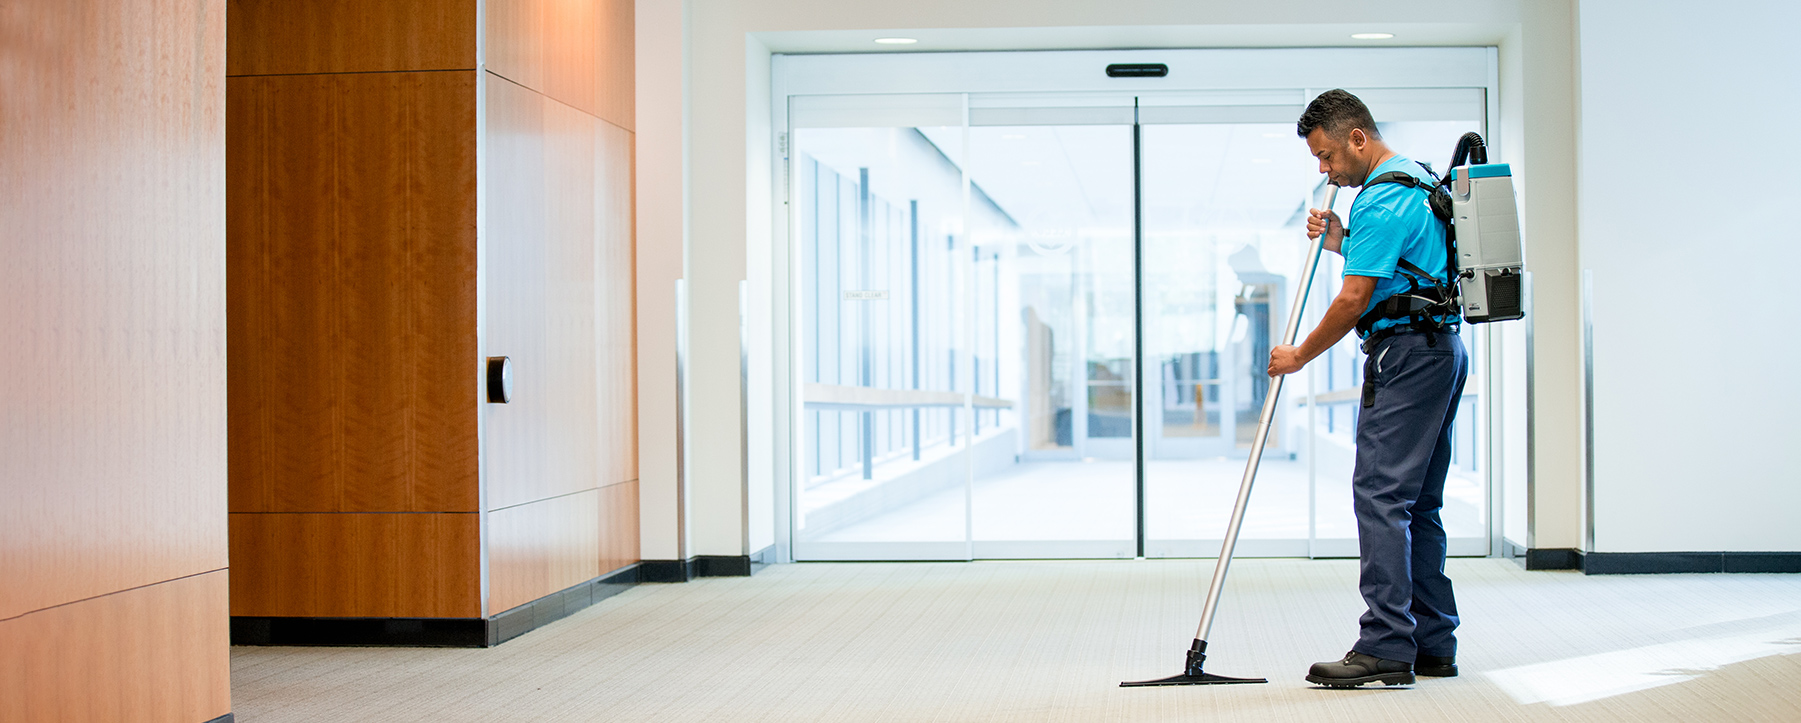 Mac's janitorial company employee cleaning the hallway of corporate office facility